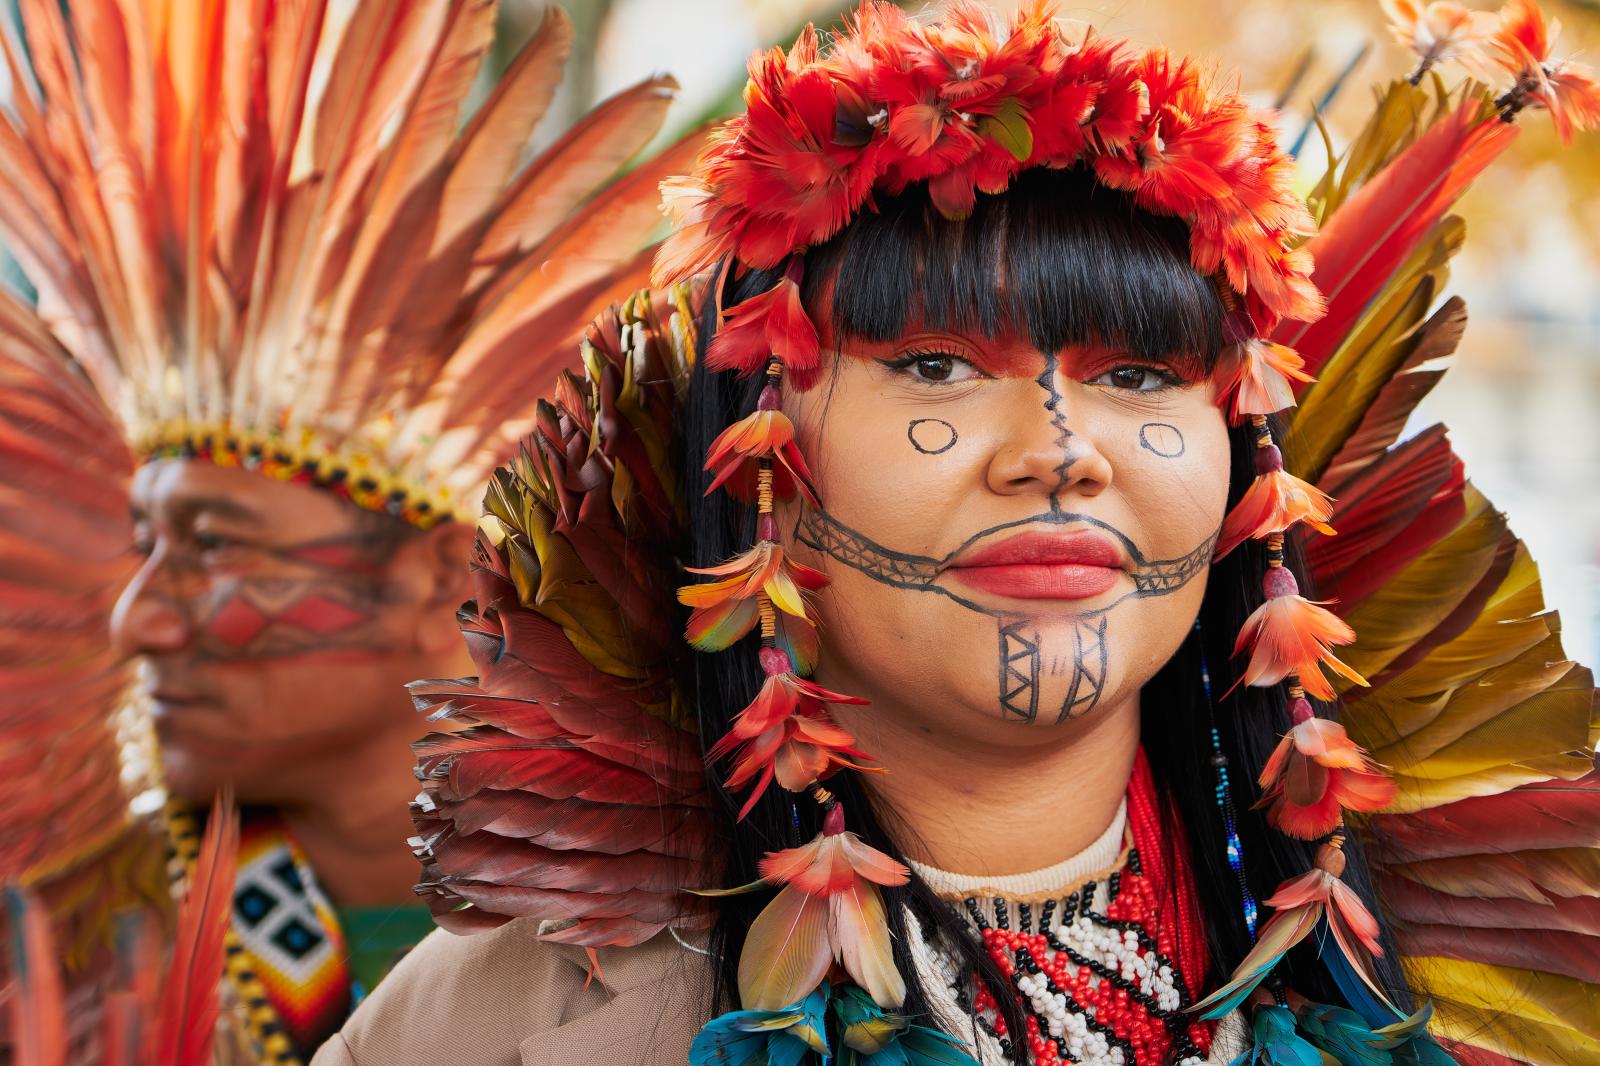 Gathering in Paris by tribal leaders from the Amazon rain forest in Brasil | Buy this image